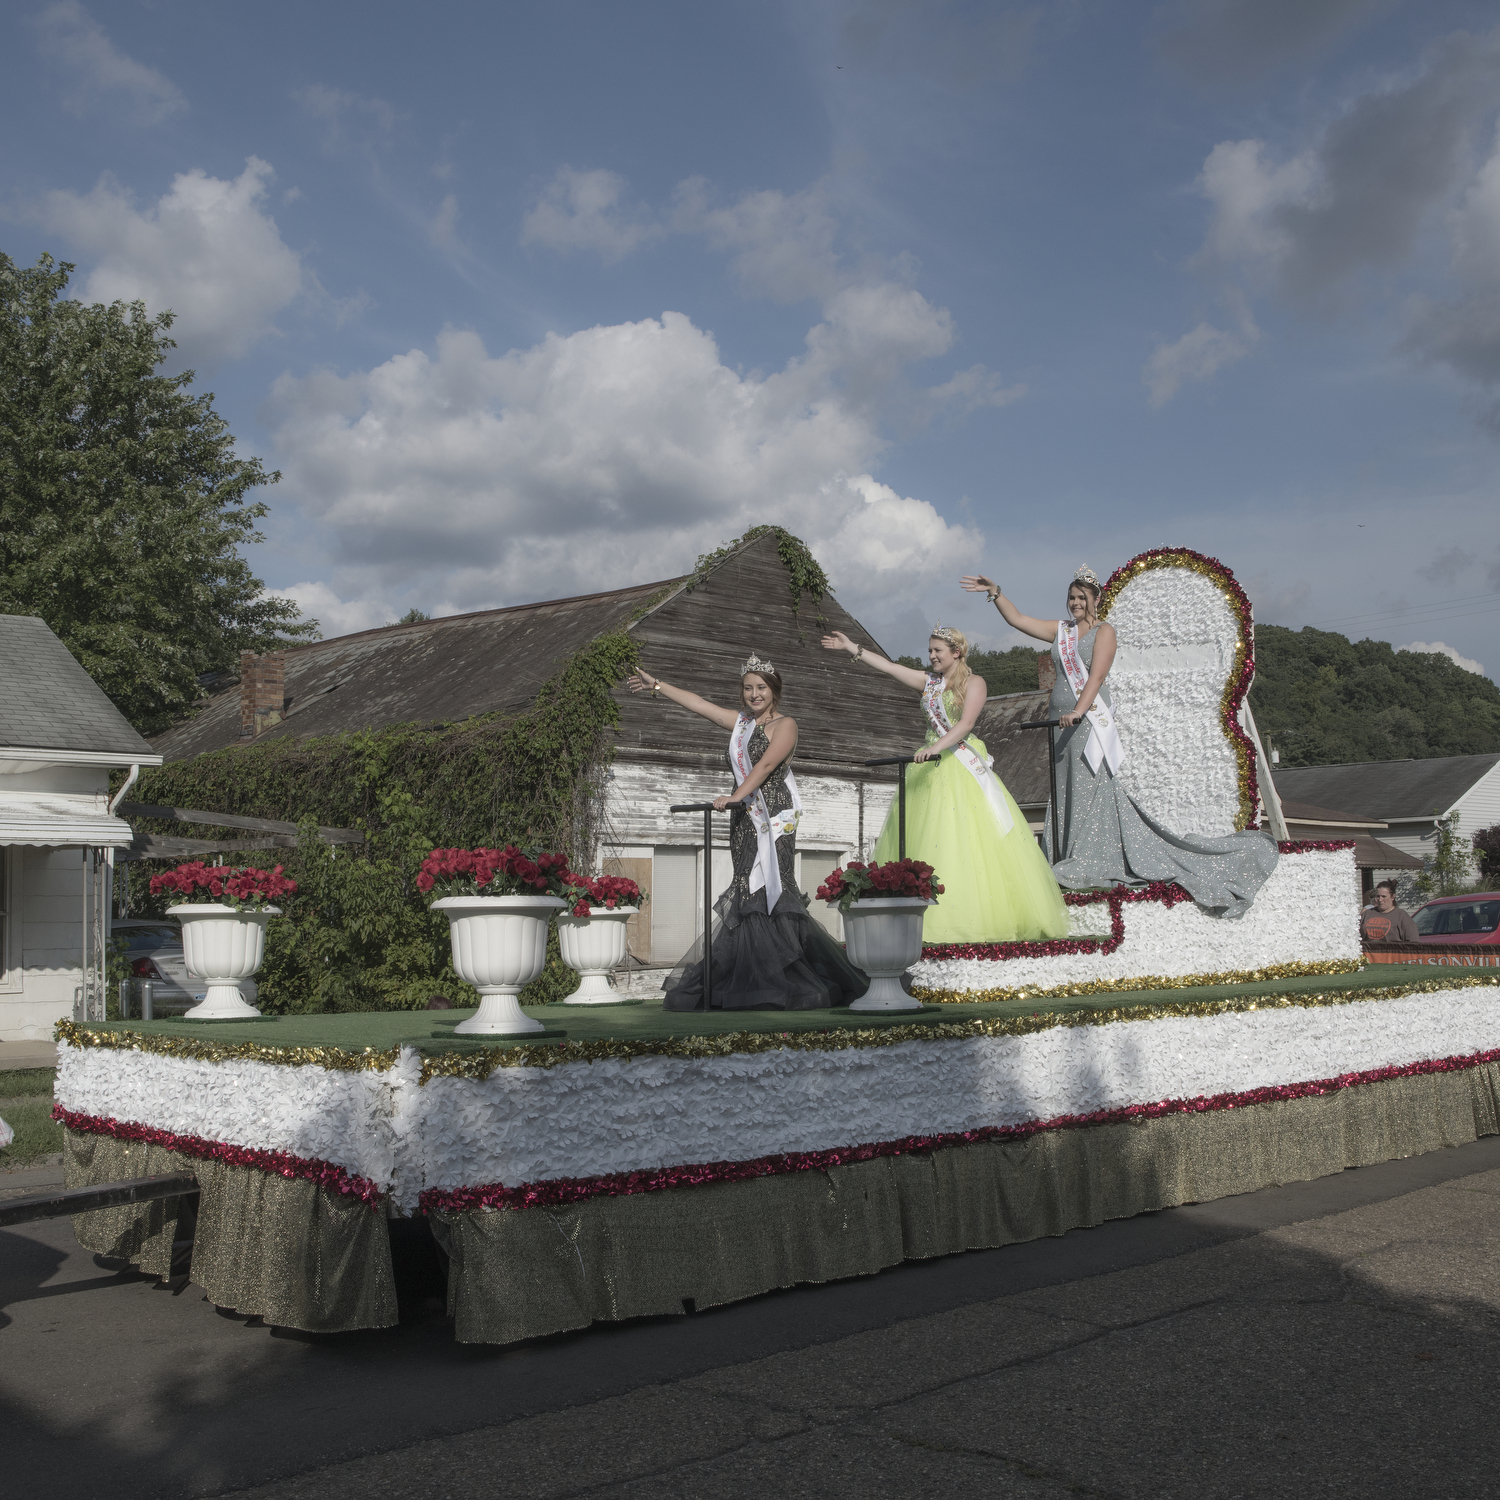 Miss Parade of the Hills' Queens: Nelsonville